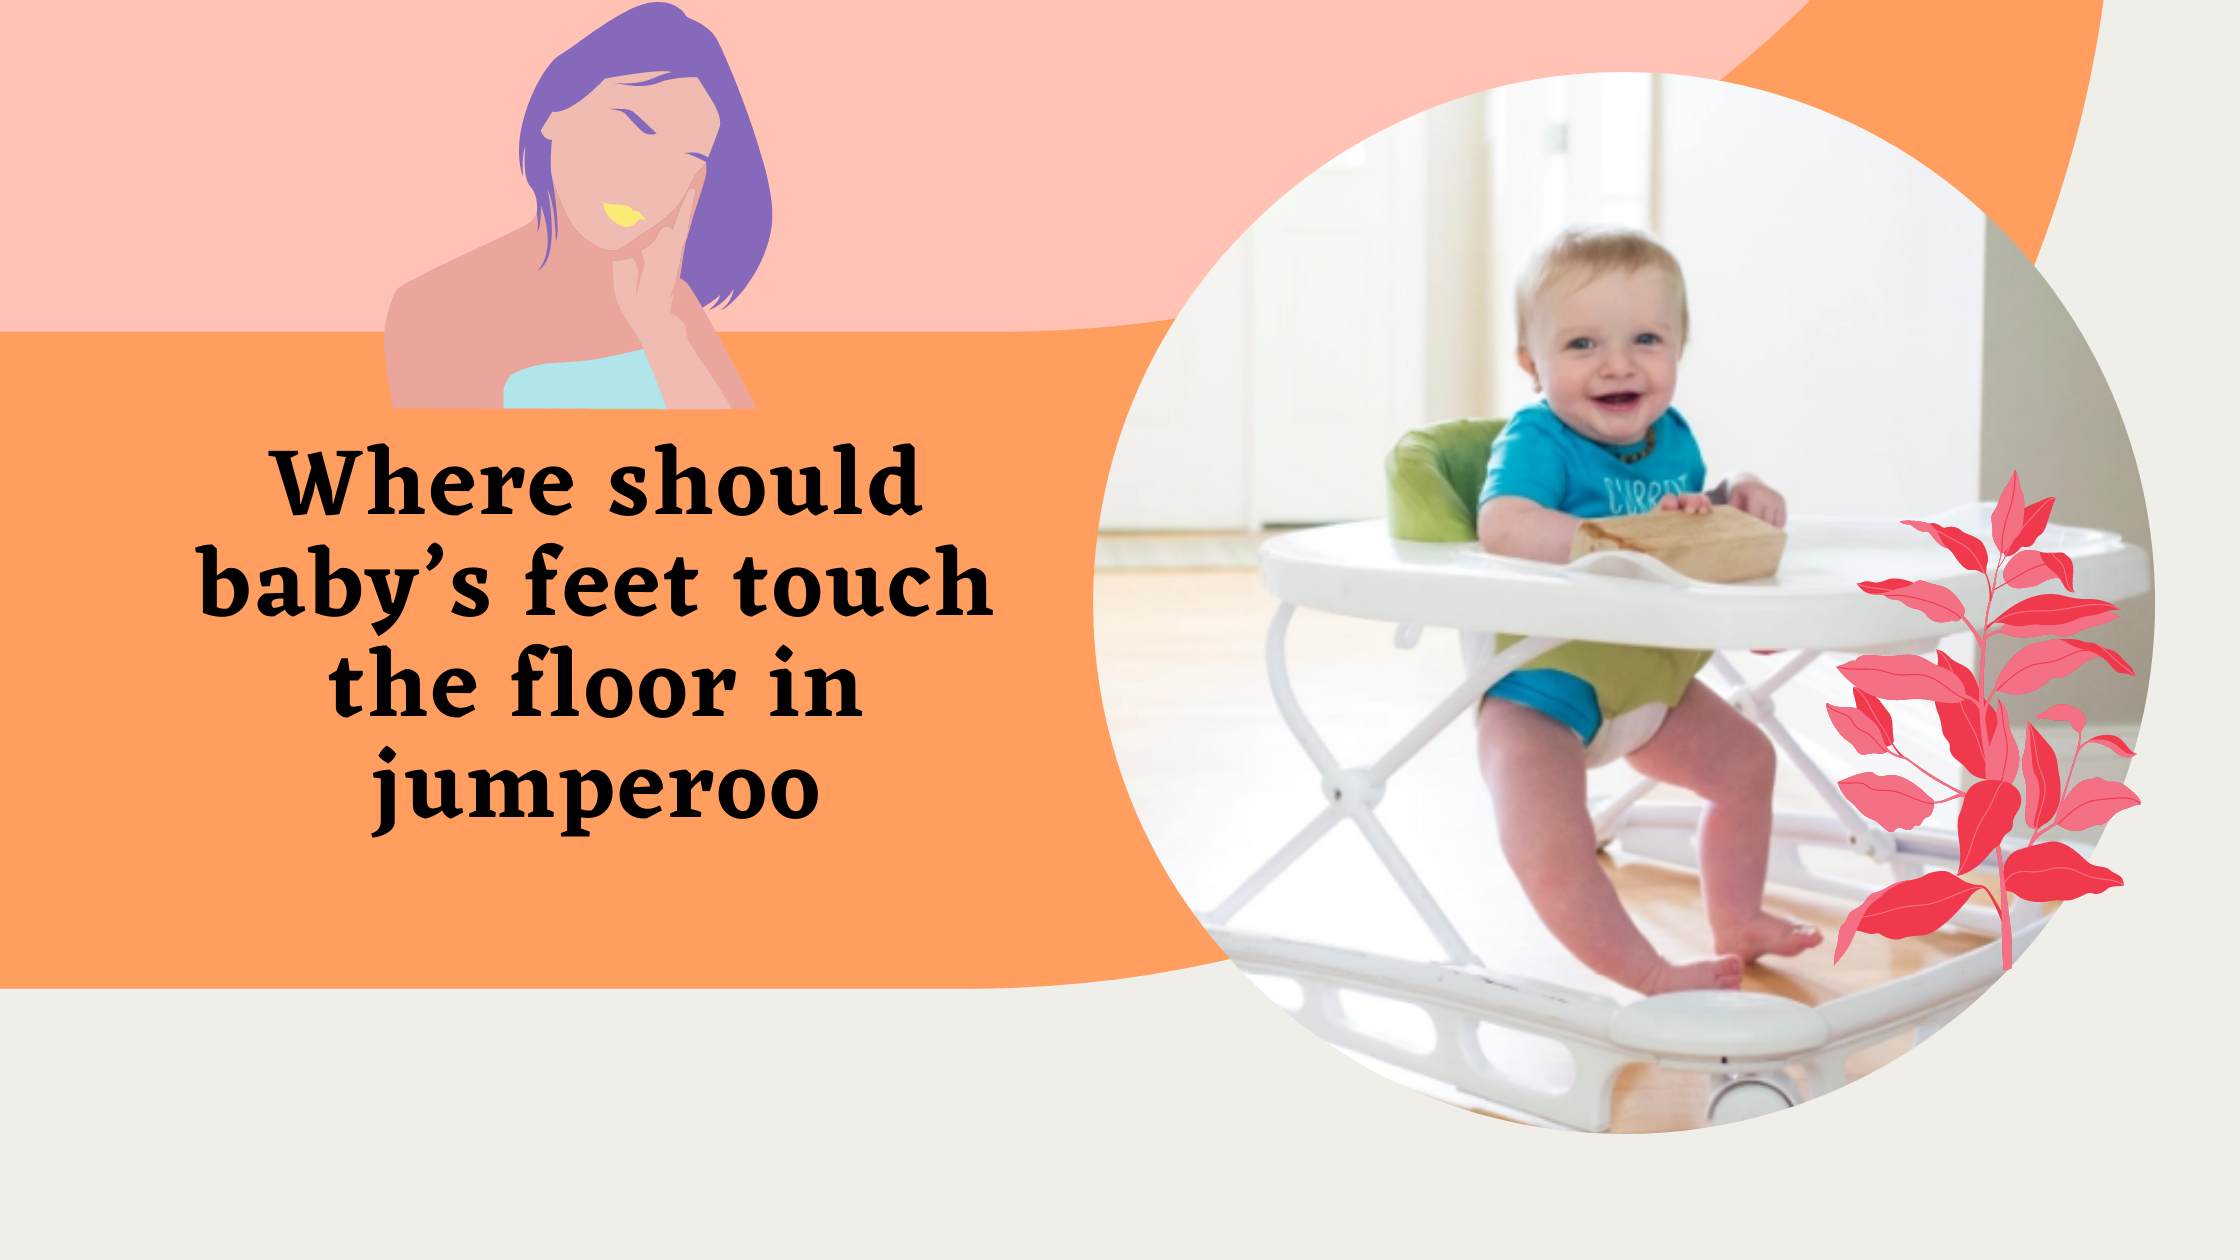 Where should baby’s feet touch the floor in jumperoo